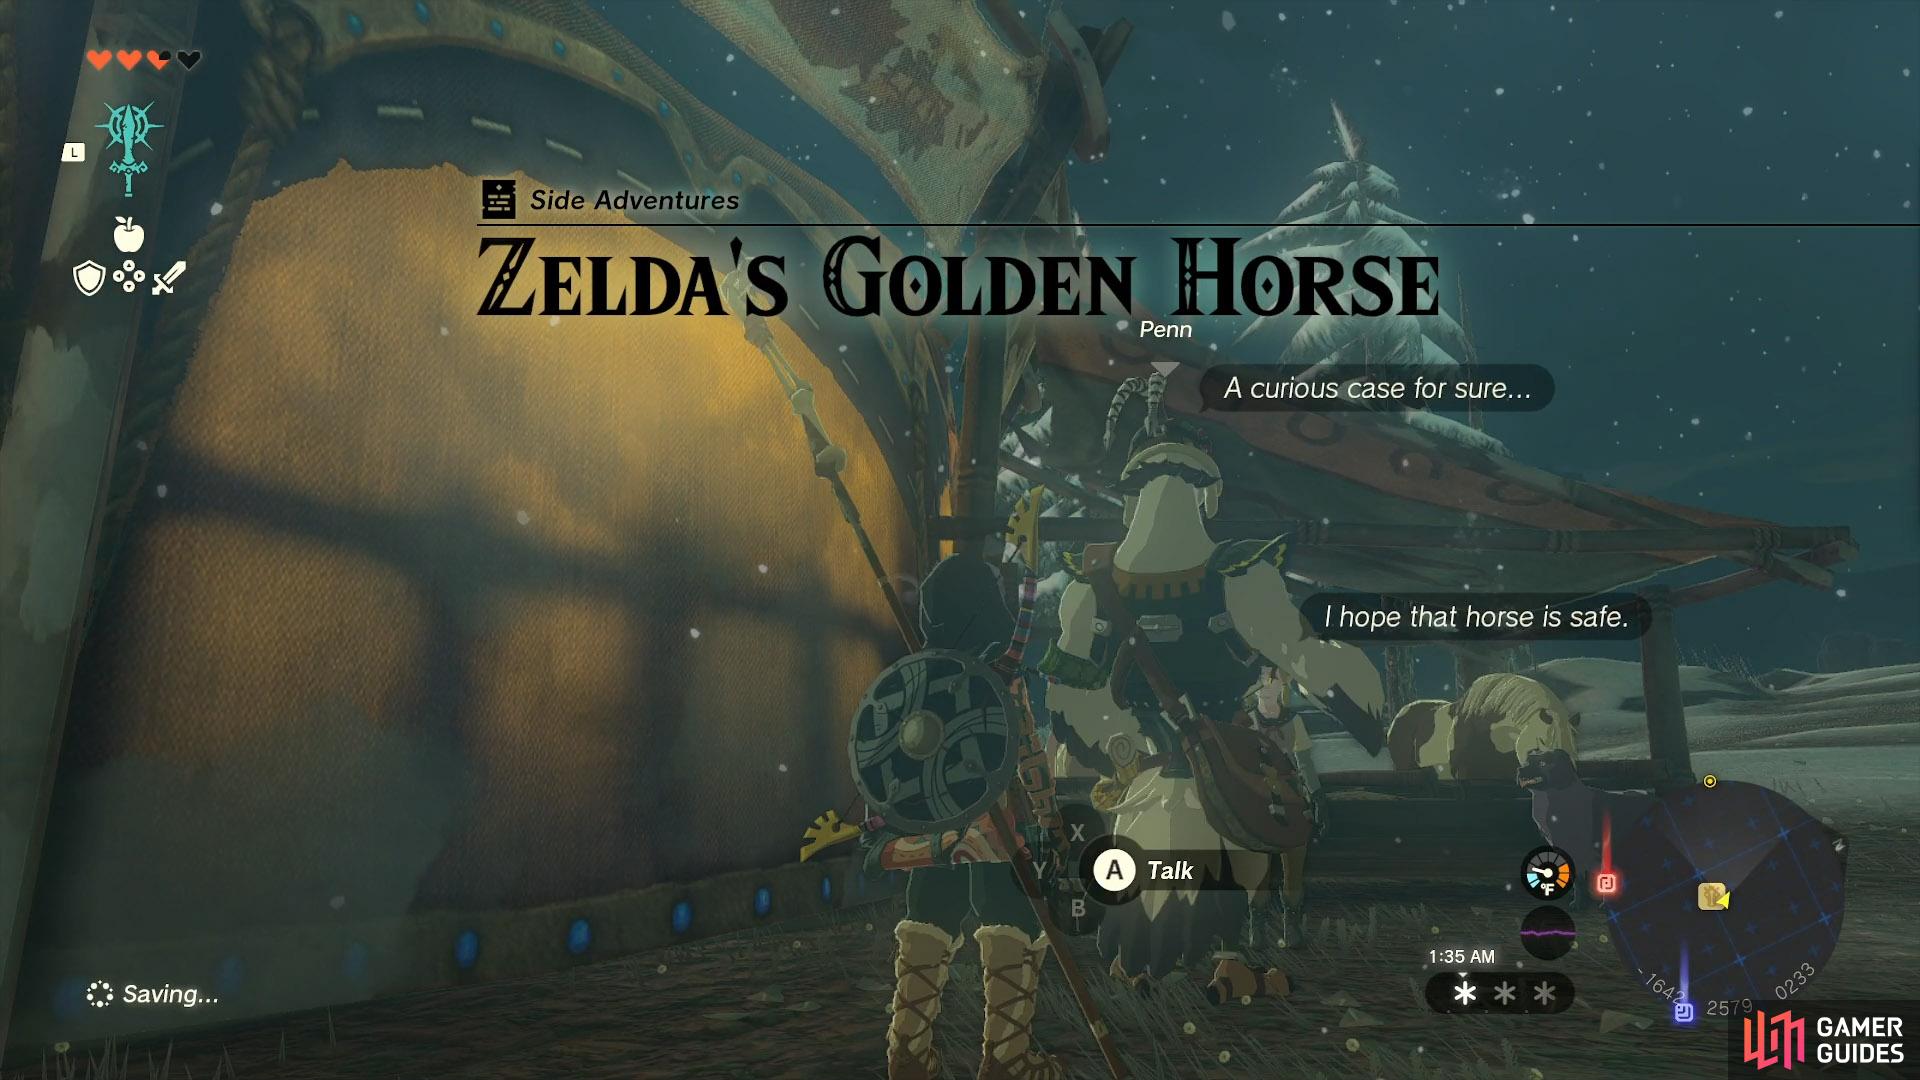 Getting the !Zelda’s Golden Horse side adventure from !Snowfield Stable